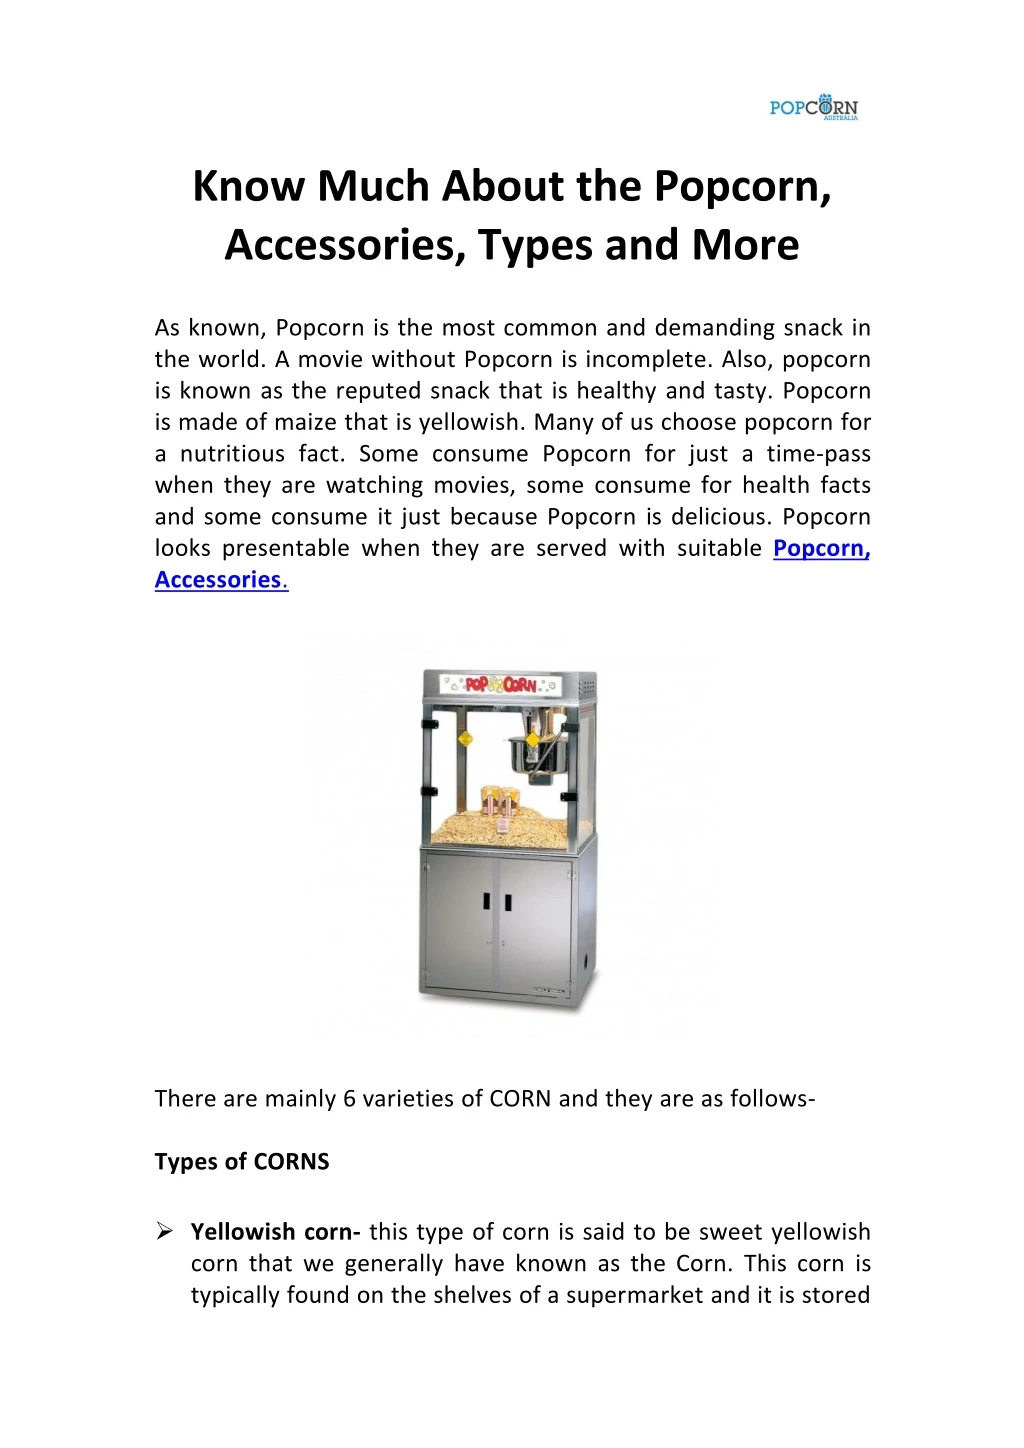 know much about the popcorn accessories types